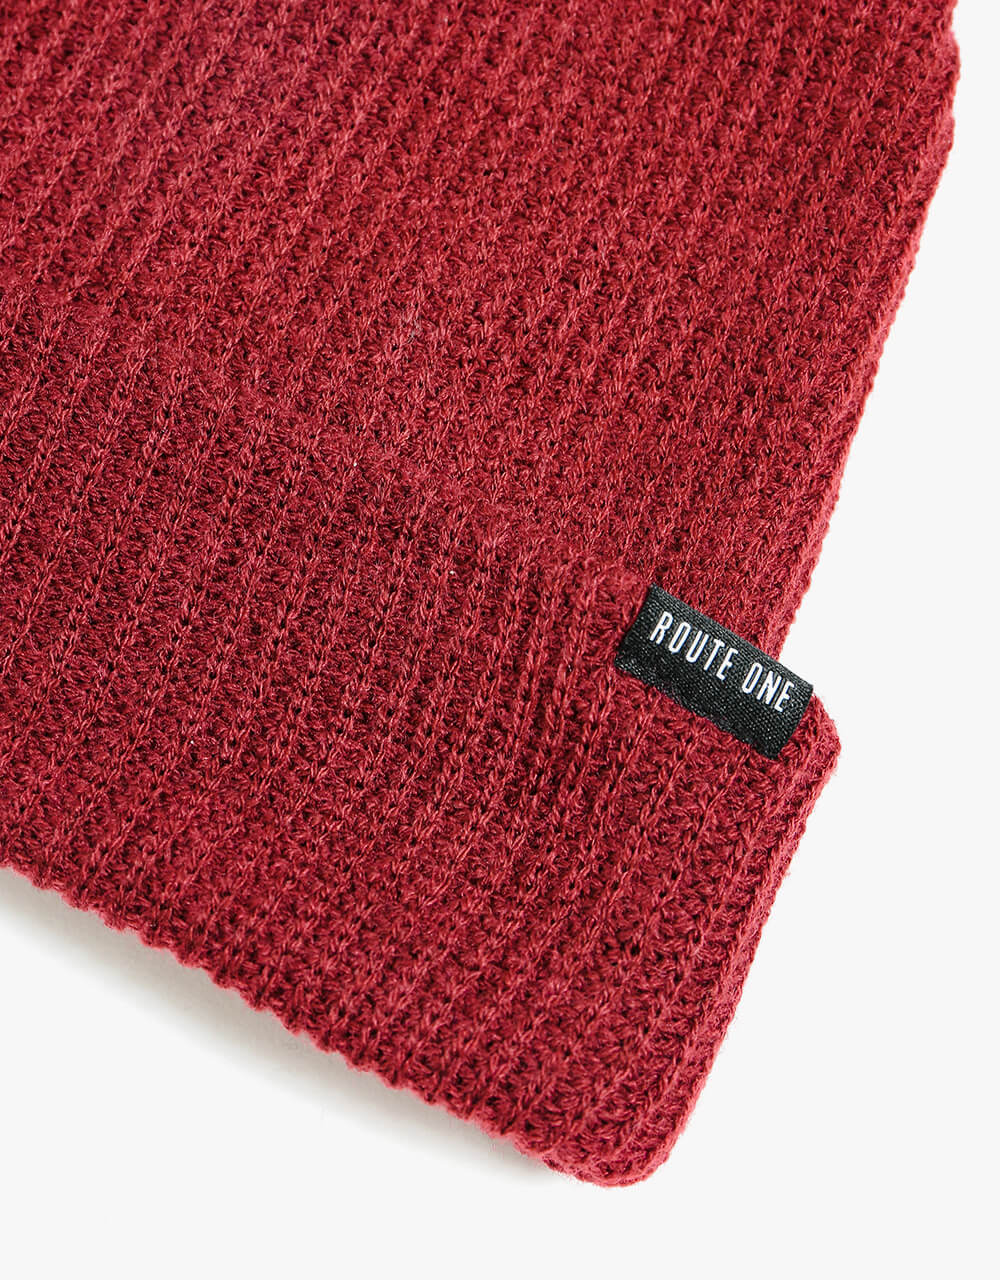 Route One Recycled Fisherman Beanie - Burgundy